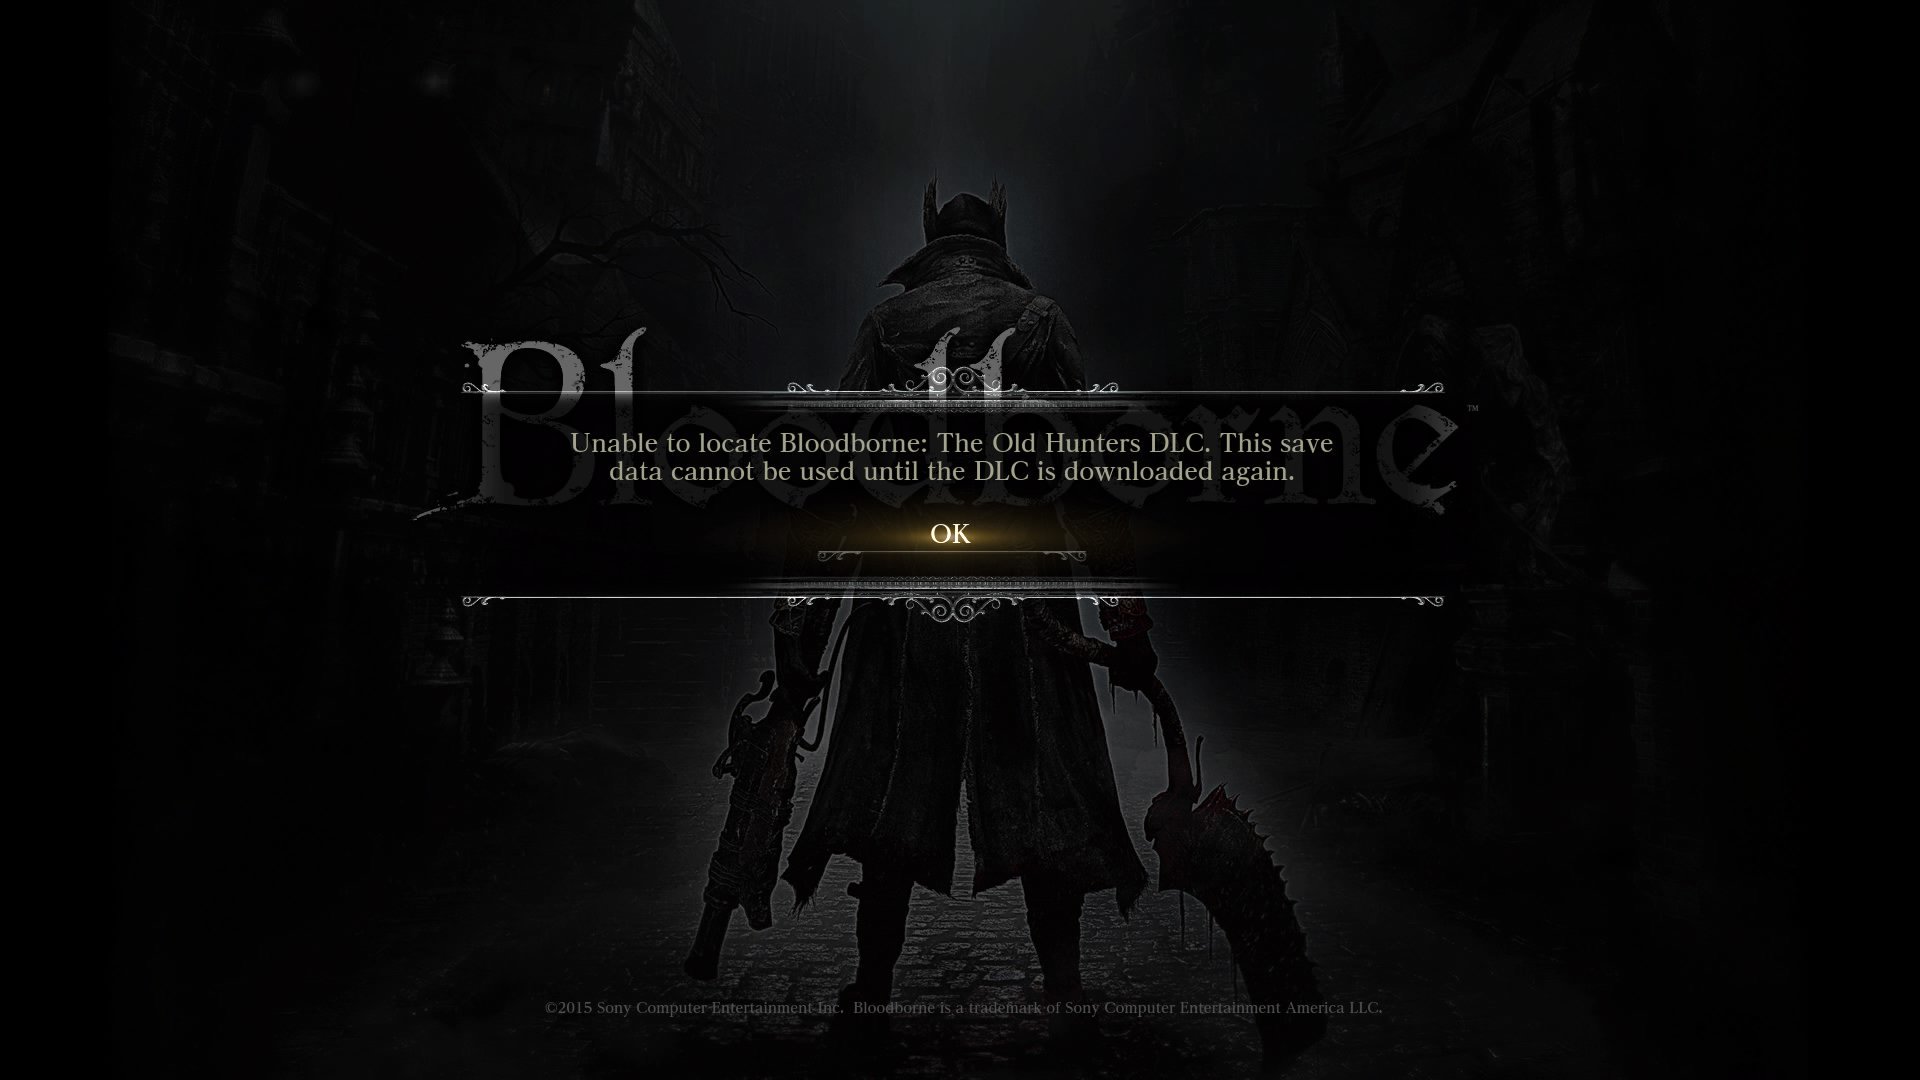 Sony promises more PC ports, so Bloodborne's only a matter of time, right?